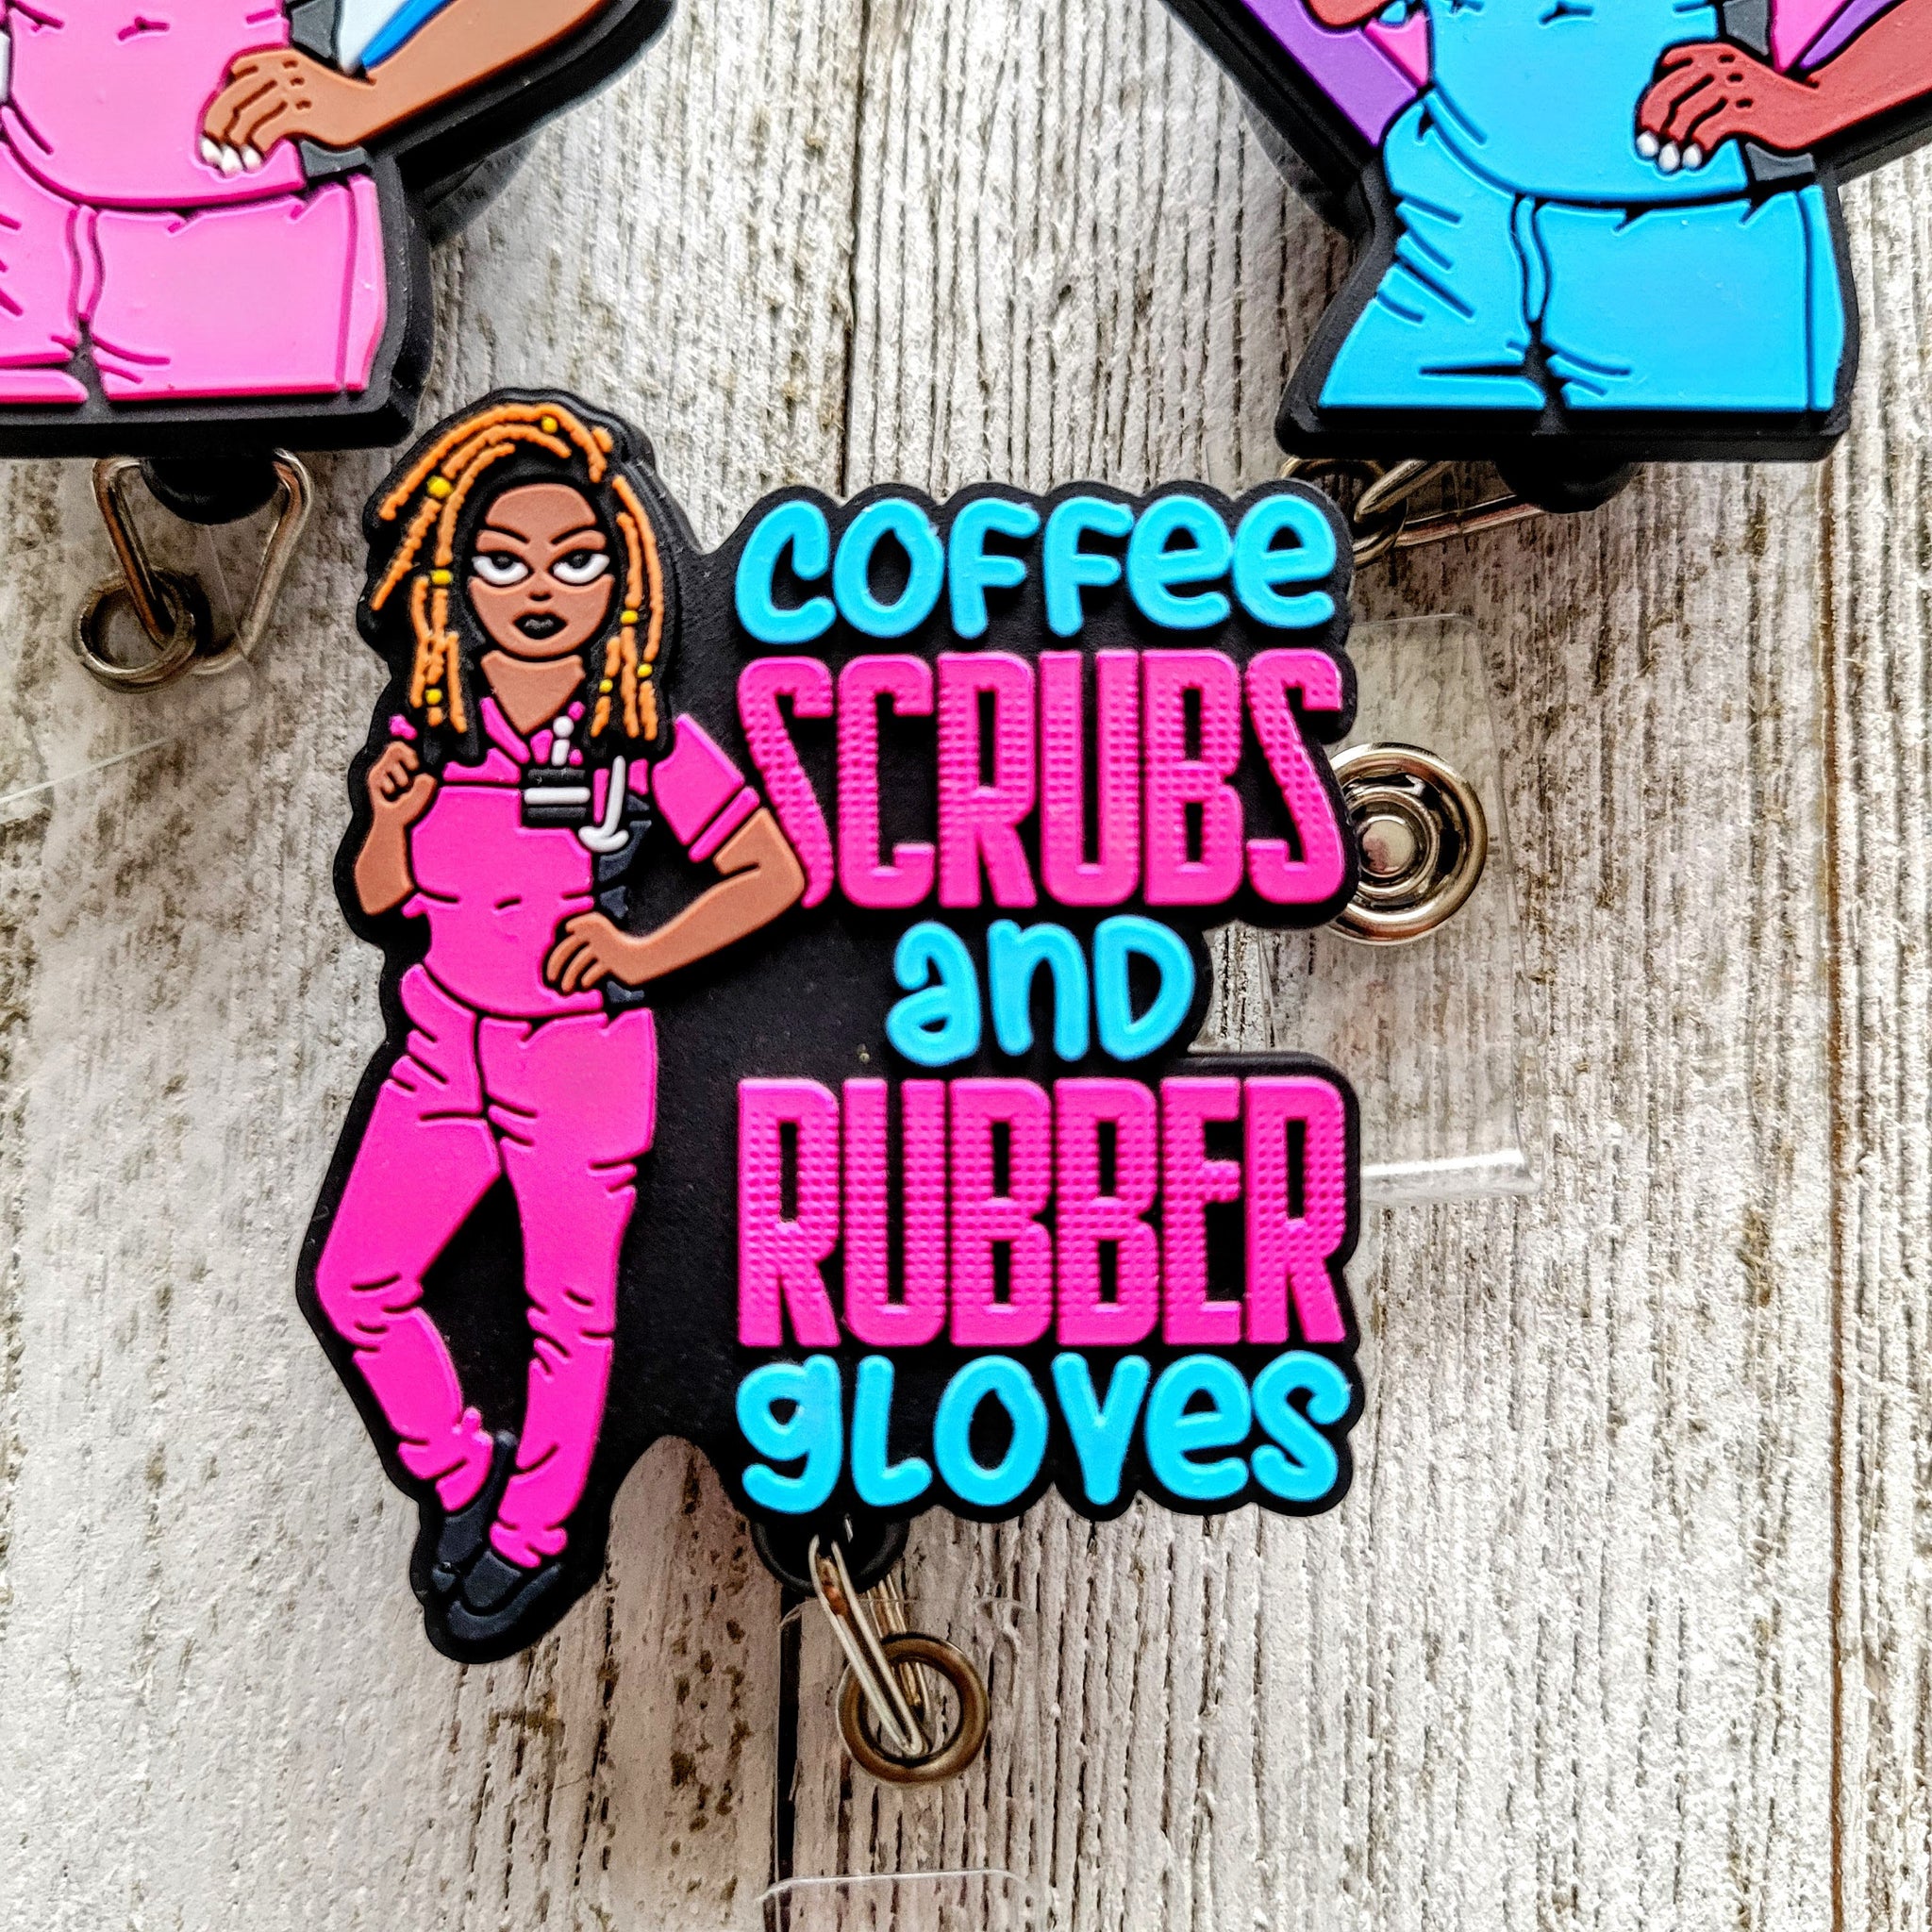 Coffee Scrubs & Rubber Gloves Pink/Teal Retractable ID Badge Reel –  Reflections By Zana